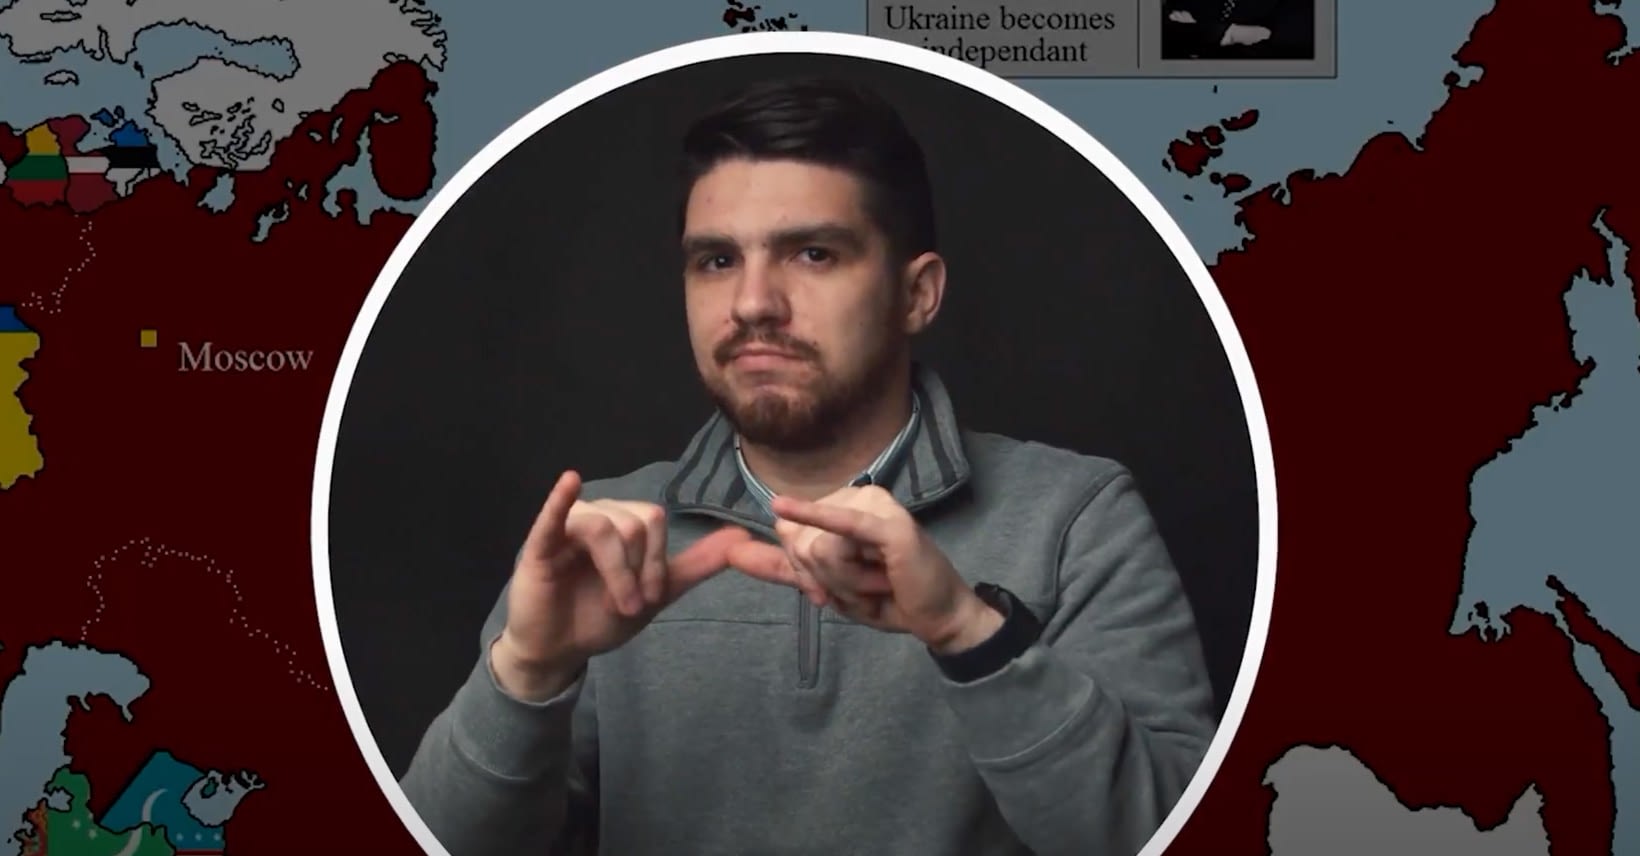 Young man shares an impactful testimony in sign language.